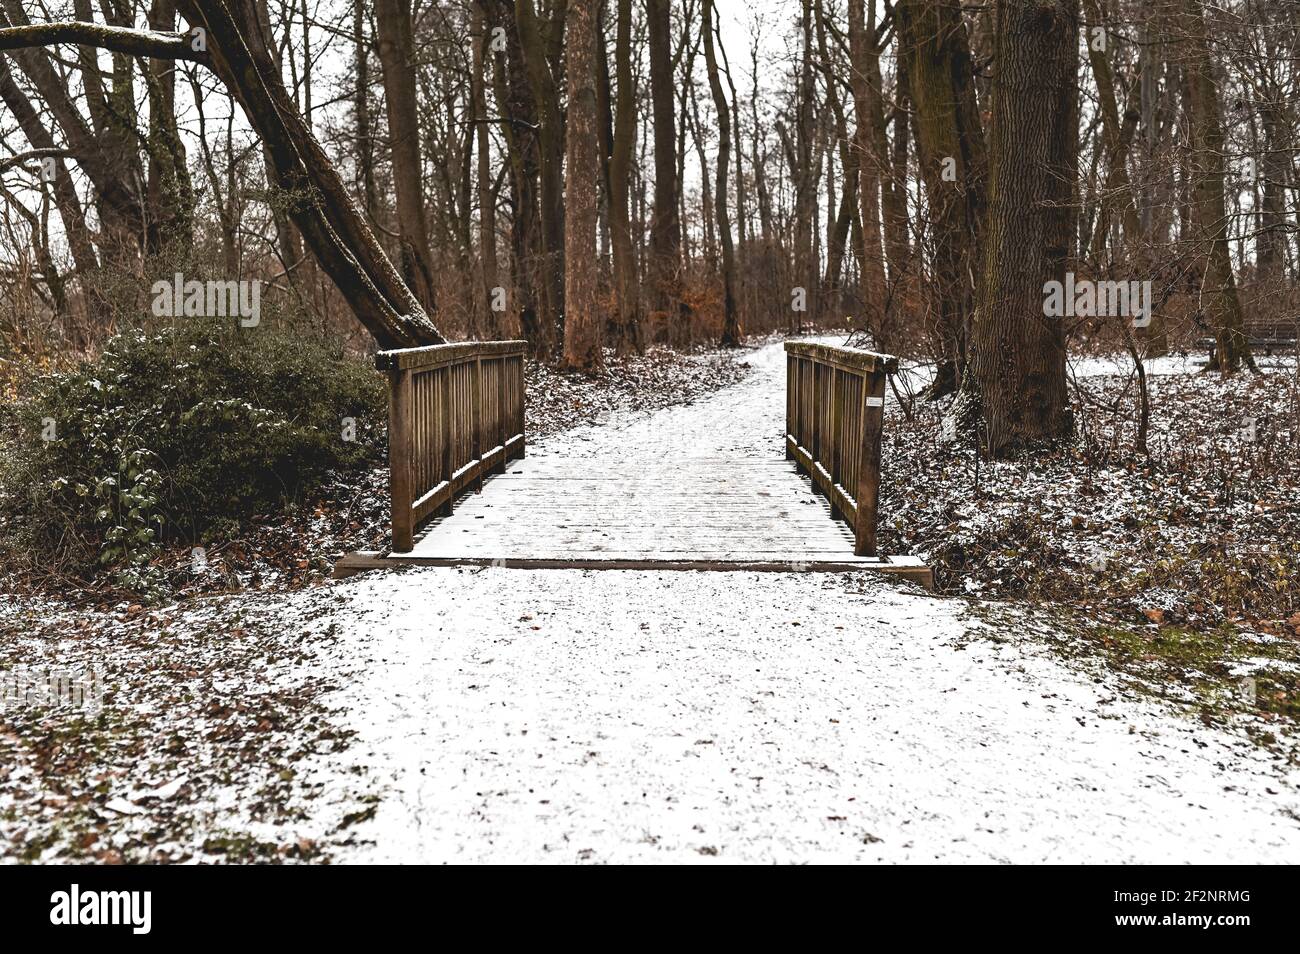 The Hinübersche garden in Hannover with snow at winter time Stock Photo